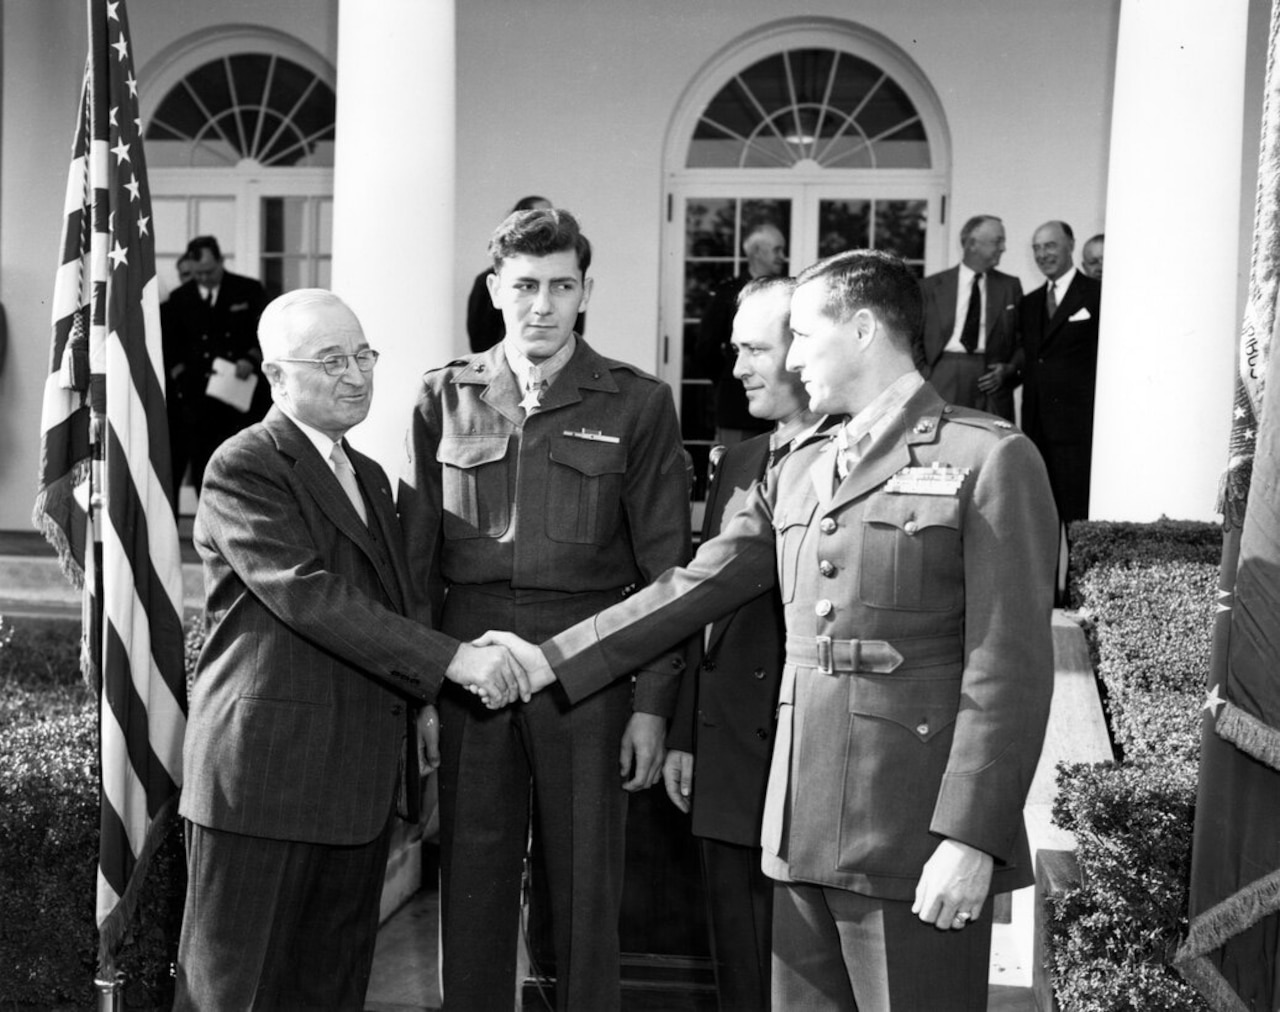 Two men shake hands as two others stand nearby. More people are in the background.